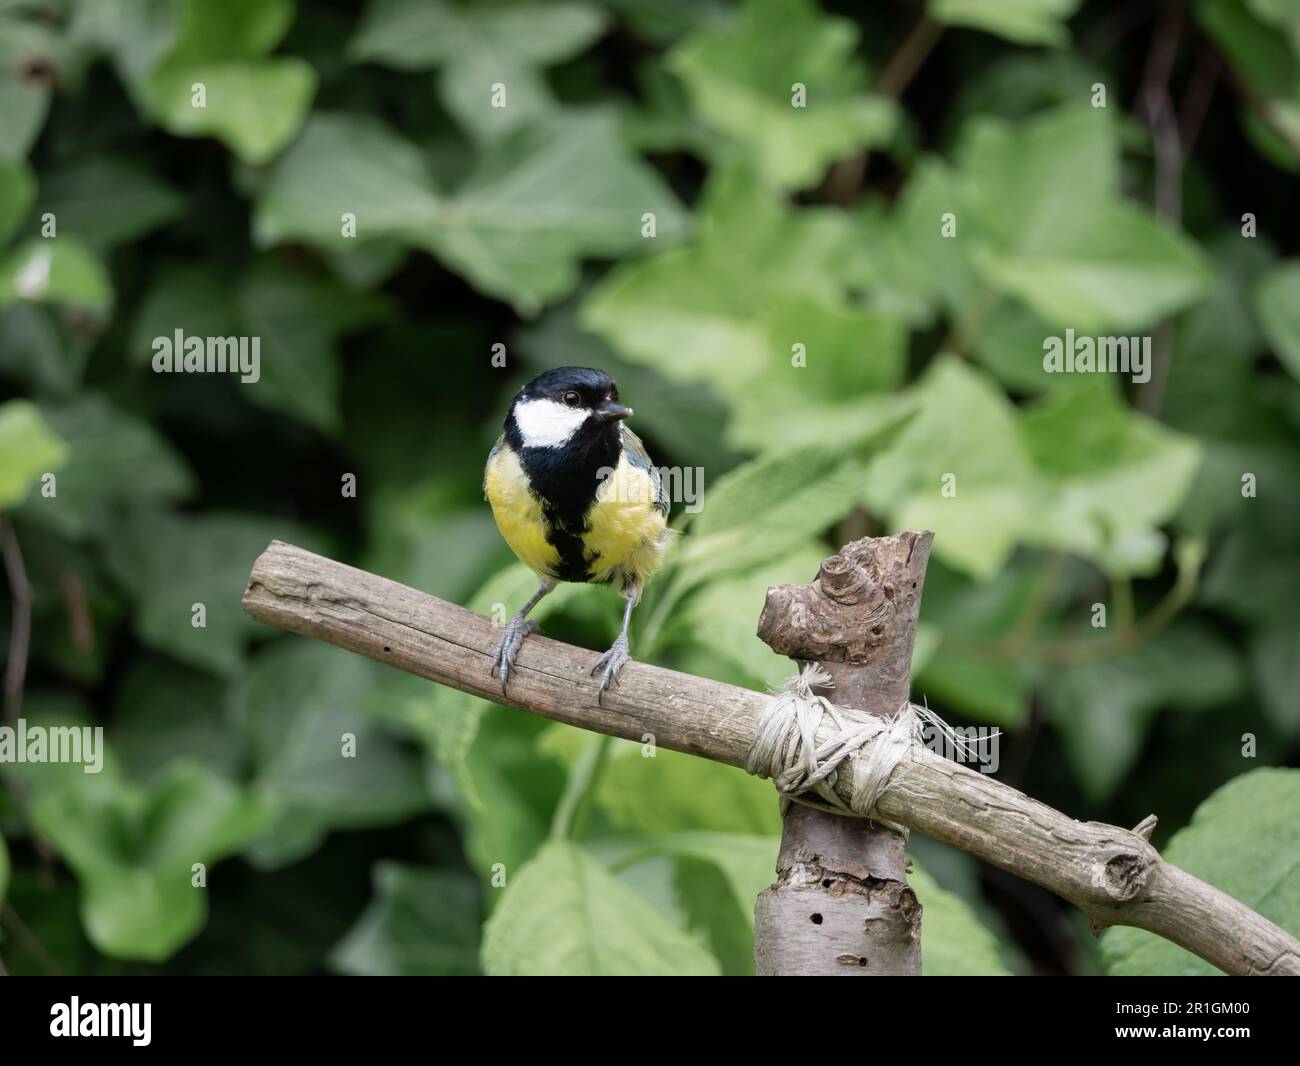 Great tit, Parus major, adult male perched on branch in garden, Netherlands Stock Photo